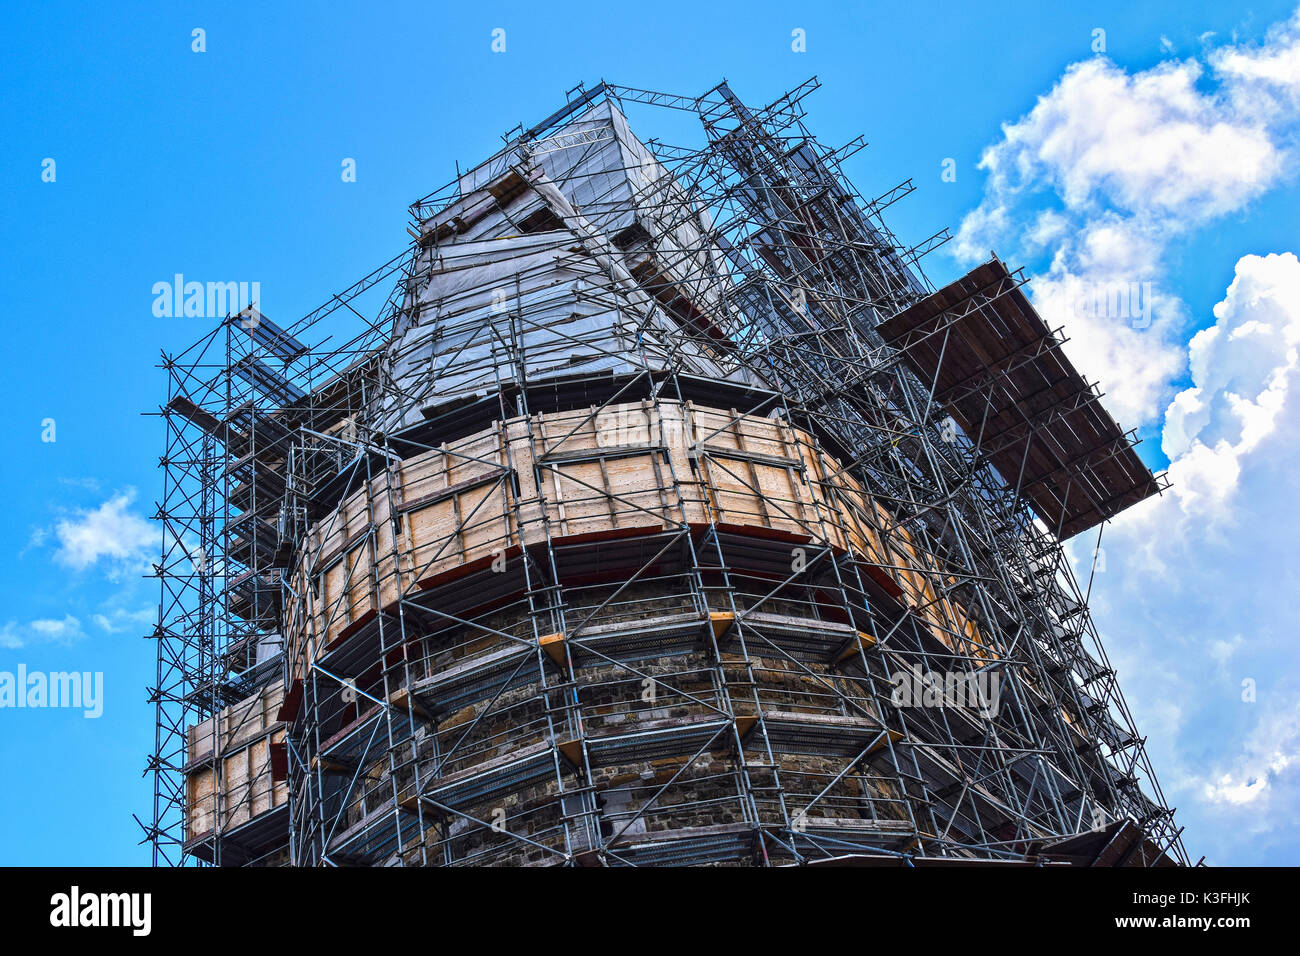 Construction, building, reparation, restoration, renovation, insulation of a large building framed by scaffoldings. Stock Photo